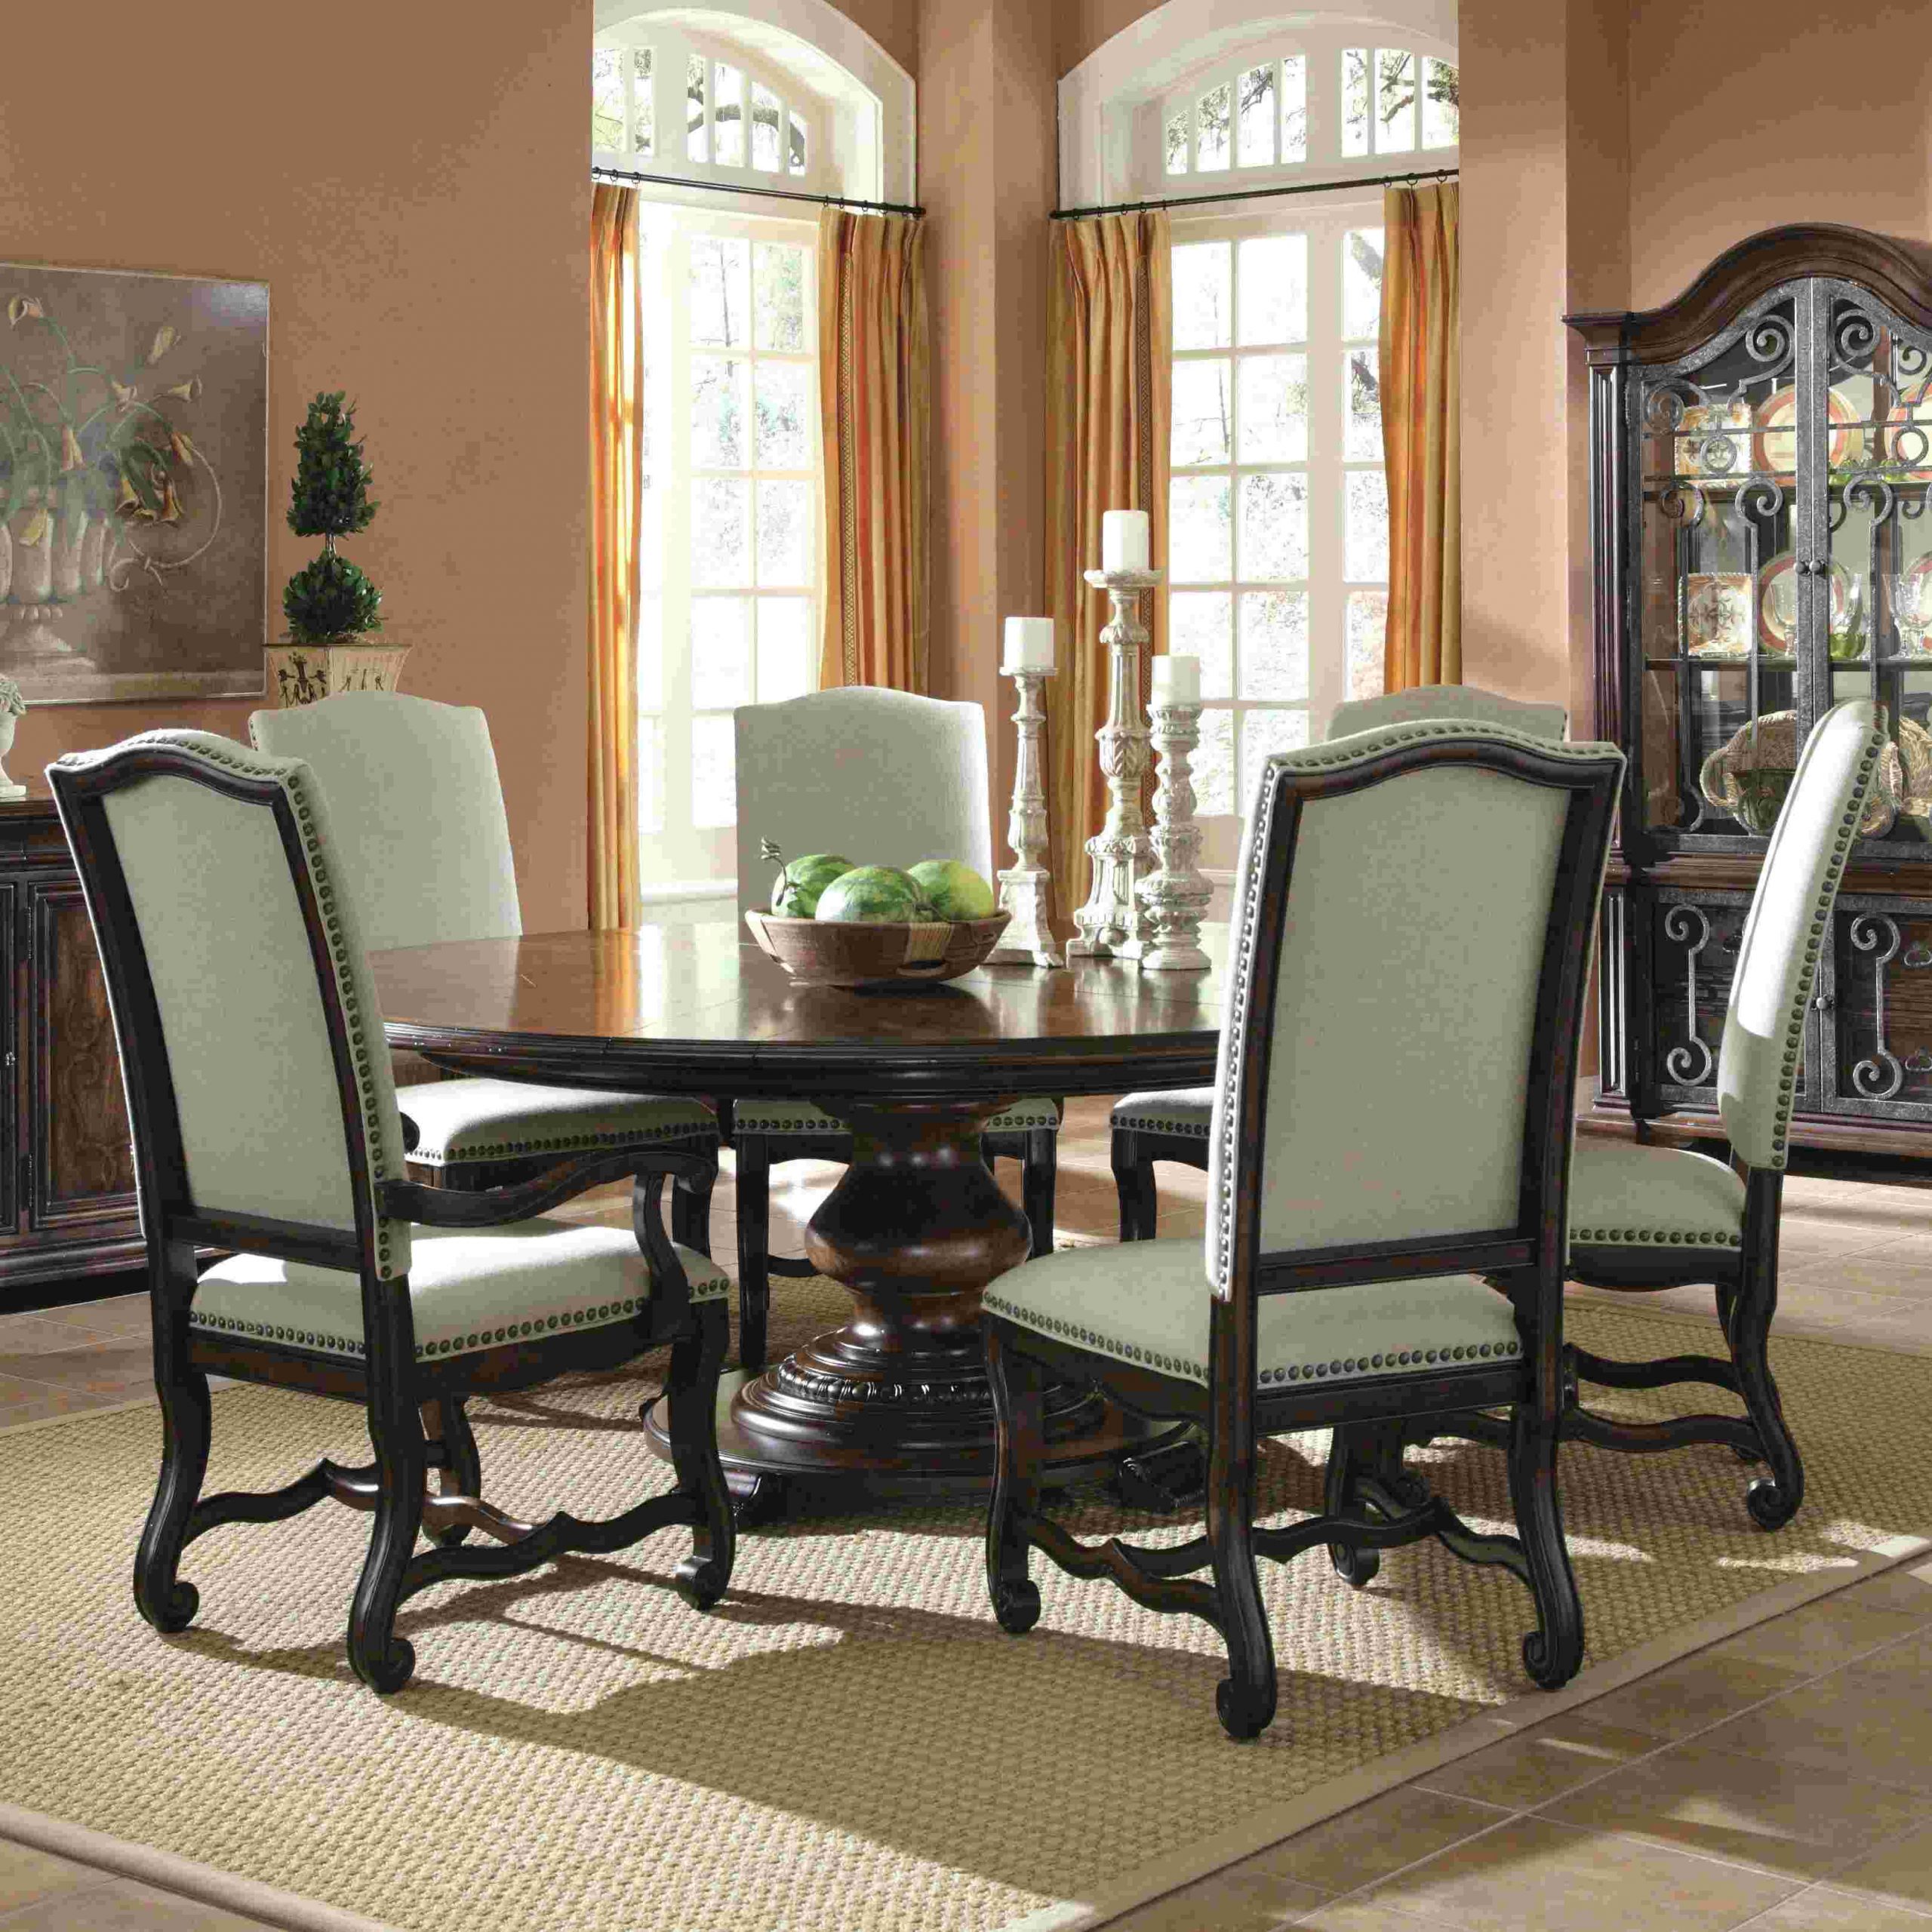 Dining Room Chairs Gumtree Cape Town Elegant Dining Room inside sizing 3221 X 3221